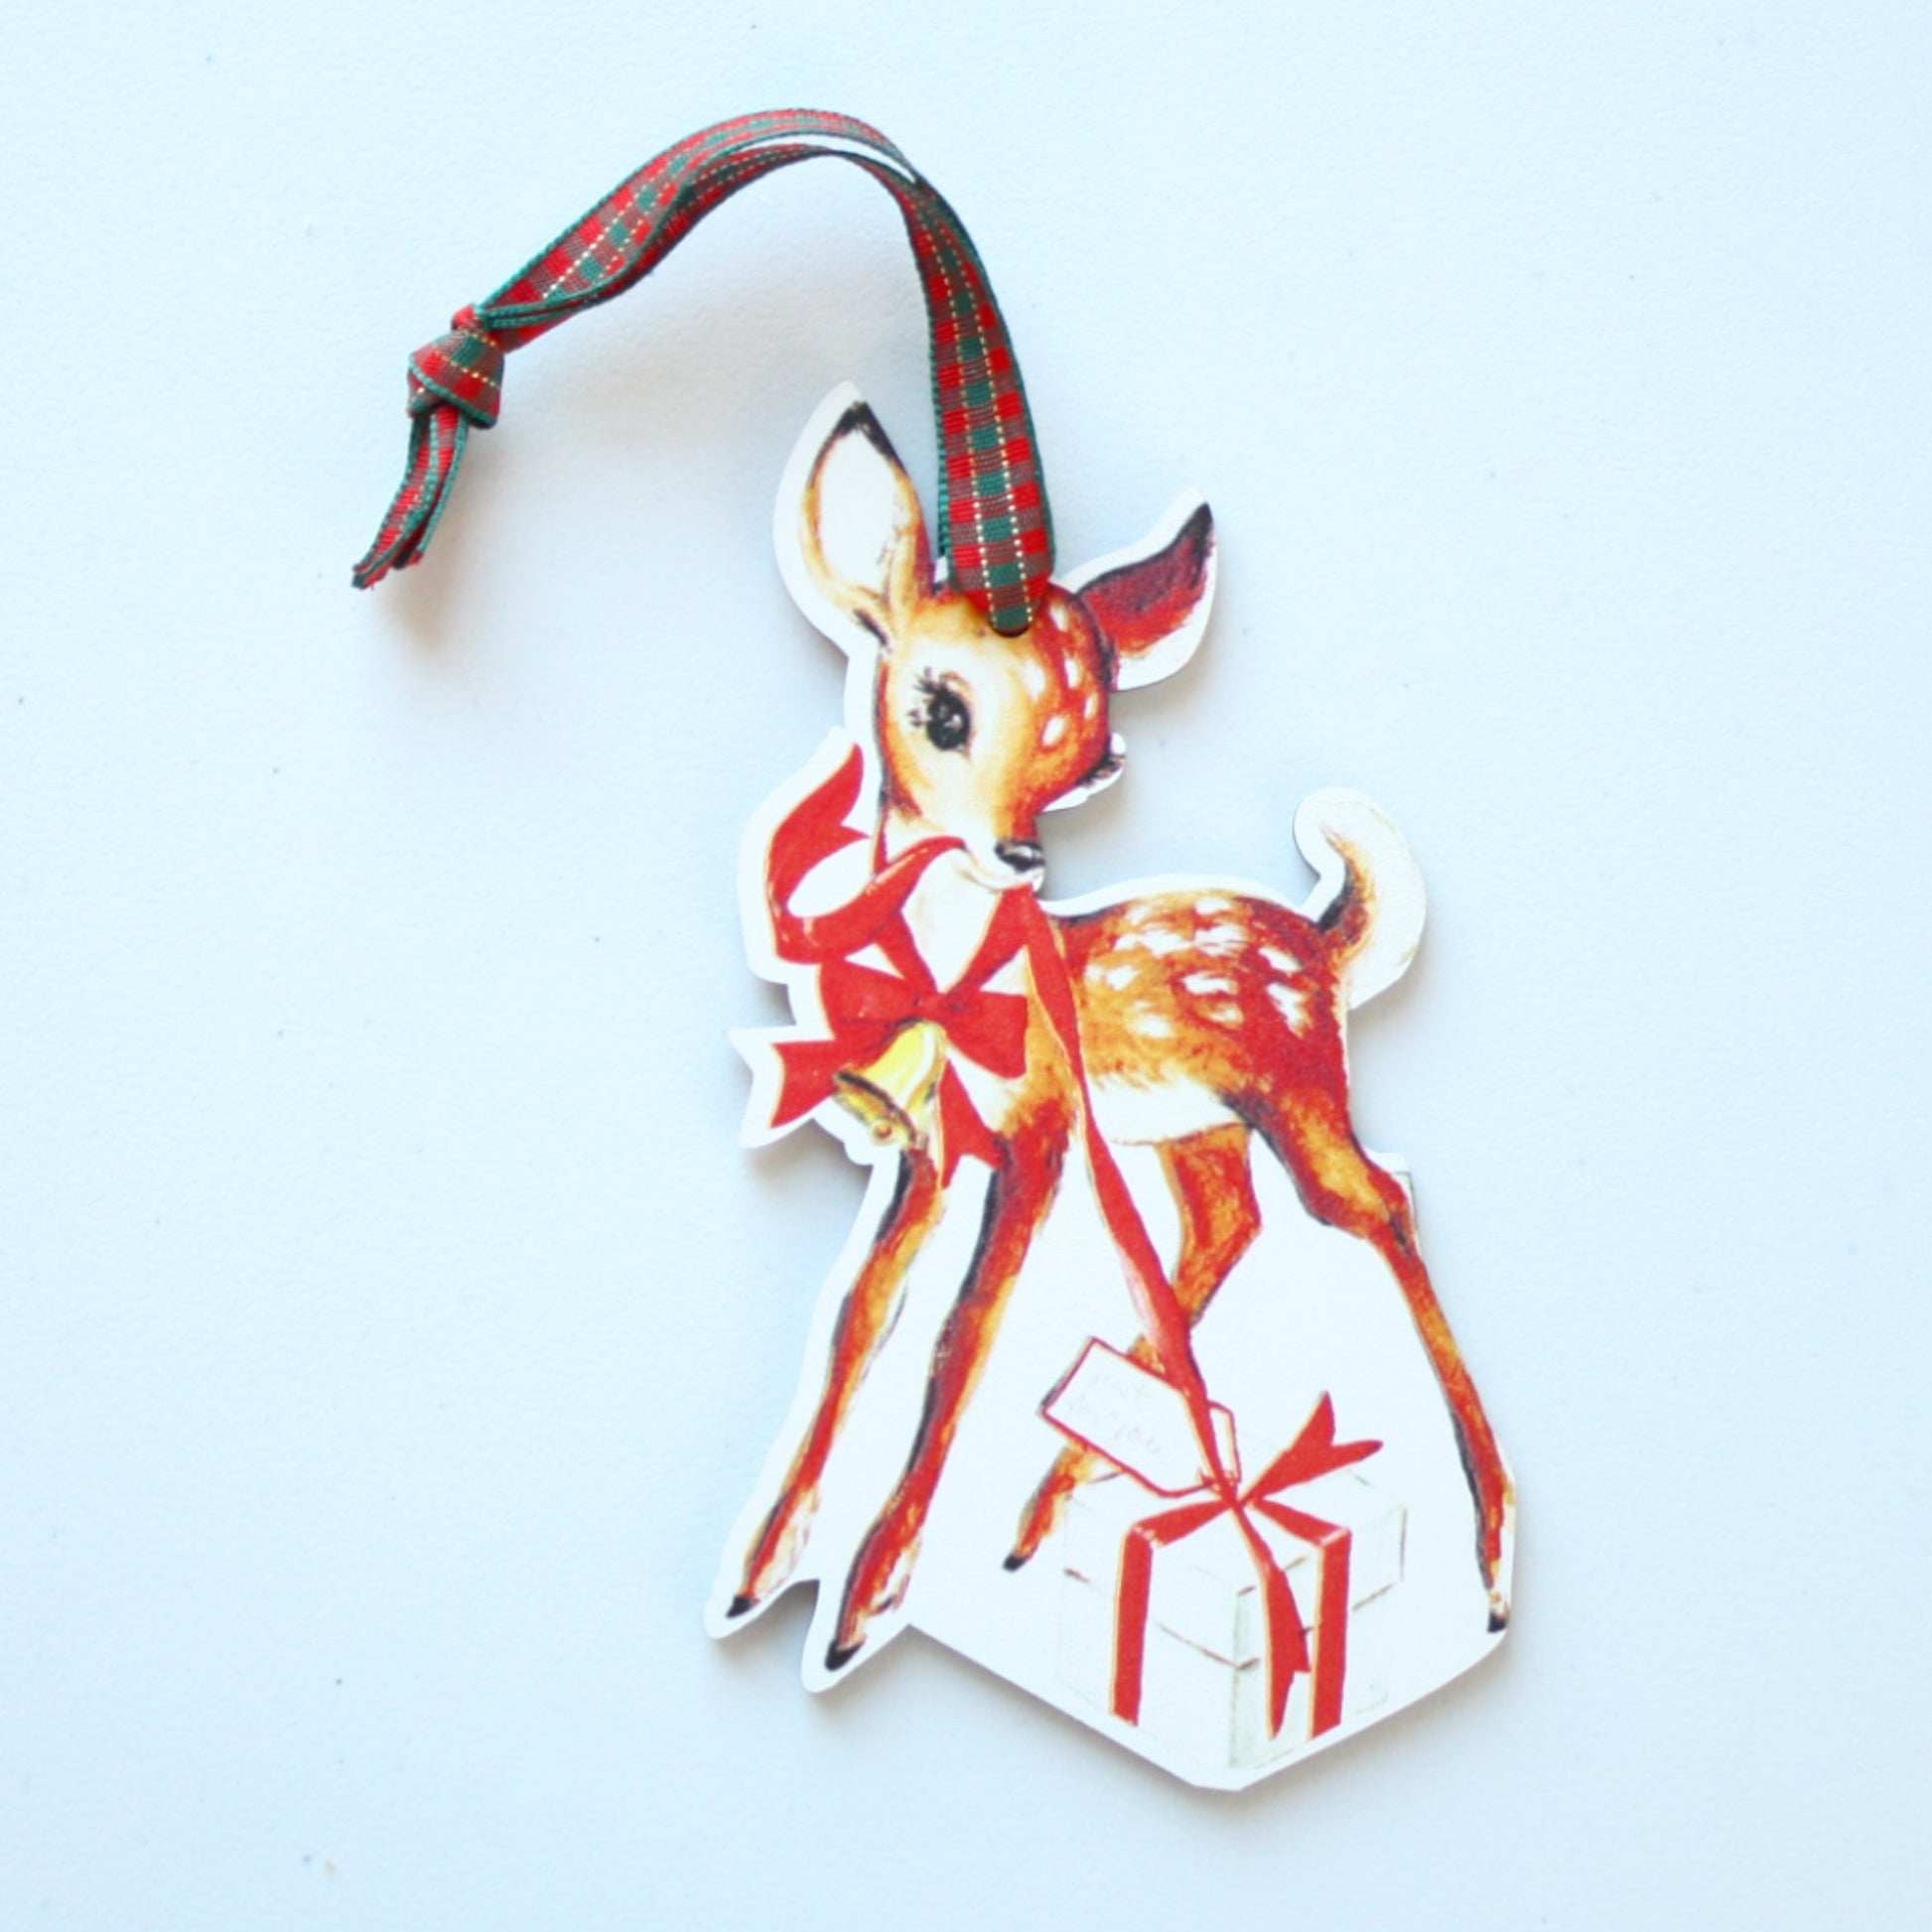 Vintage Style Reindeer with Gift - Wood Christmas Ornament - Made in the USA